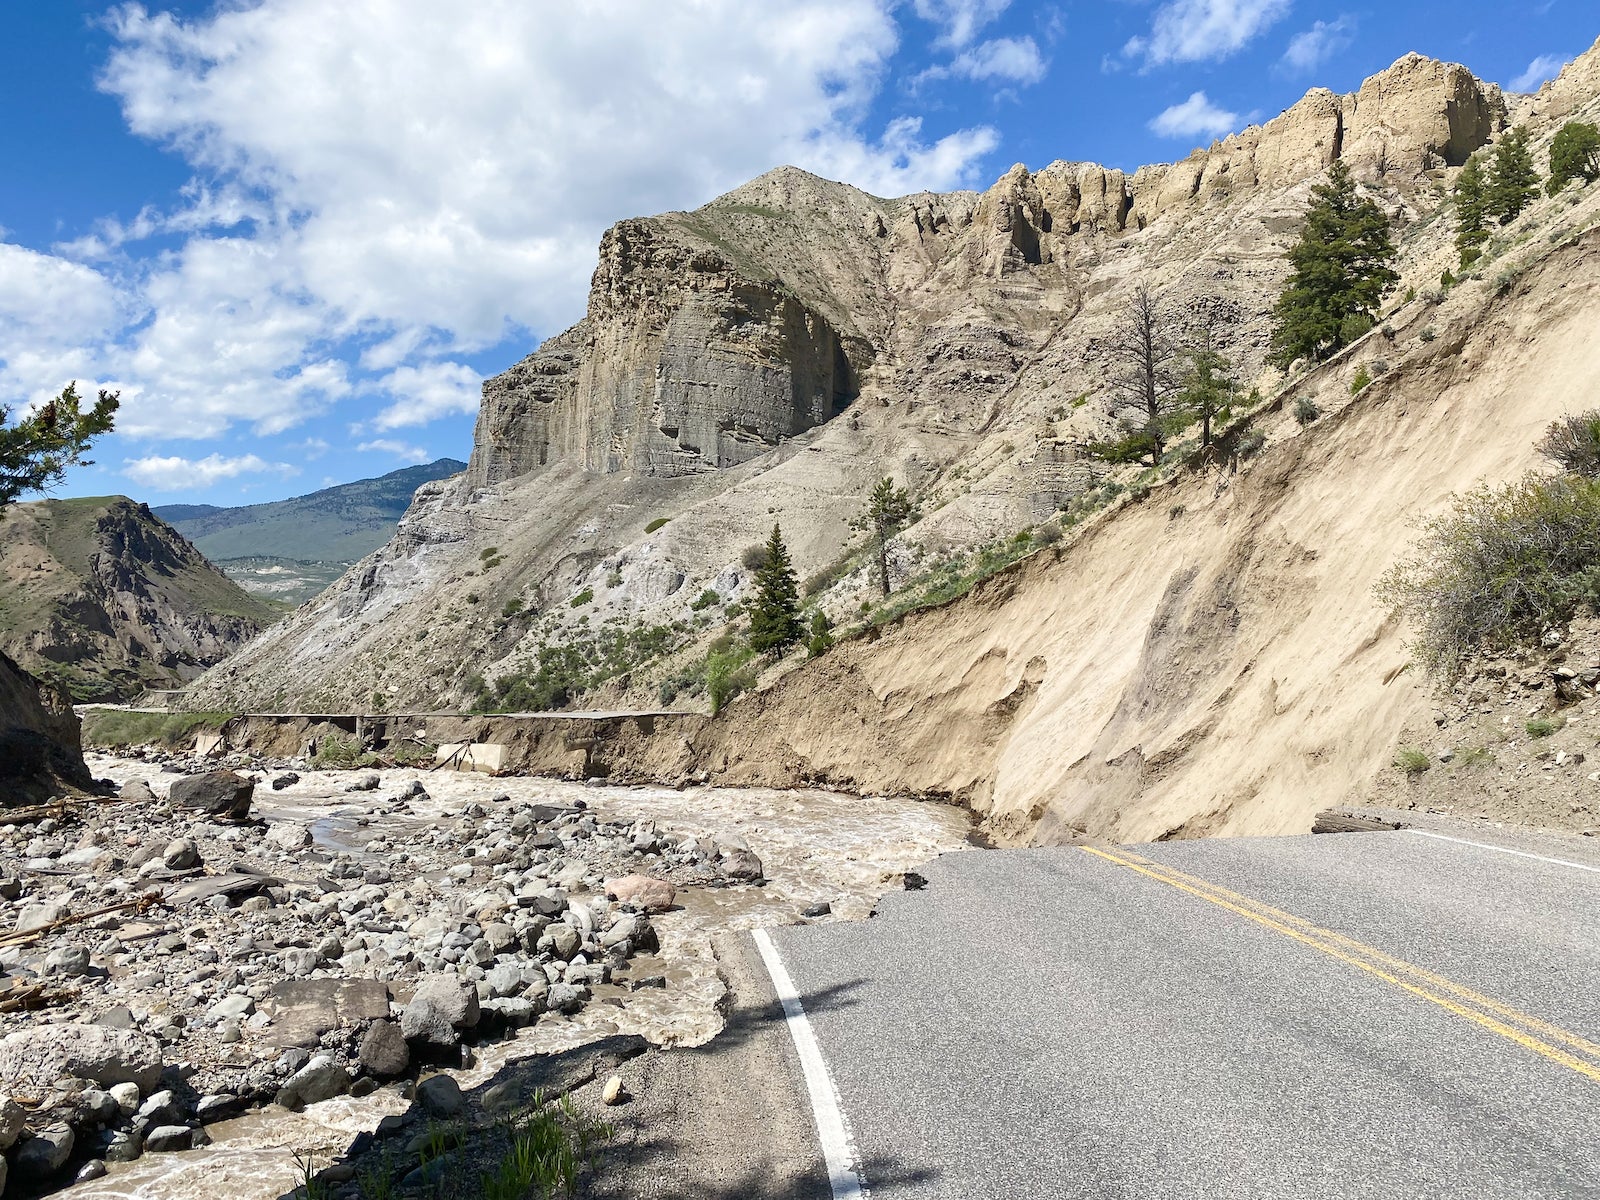 Yellowstone National Park to reopen with restrictions after heavy floods